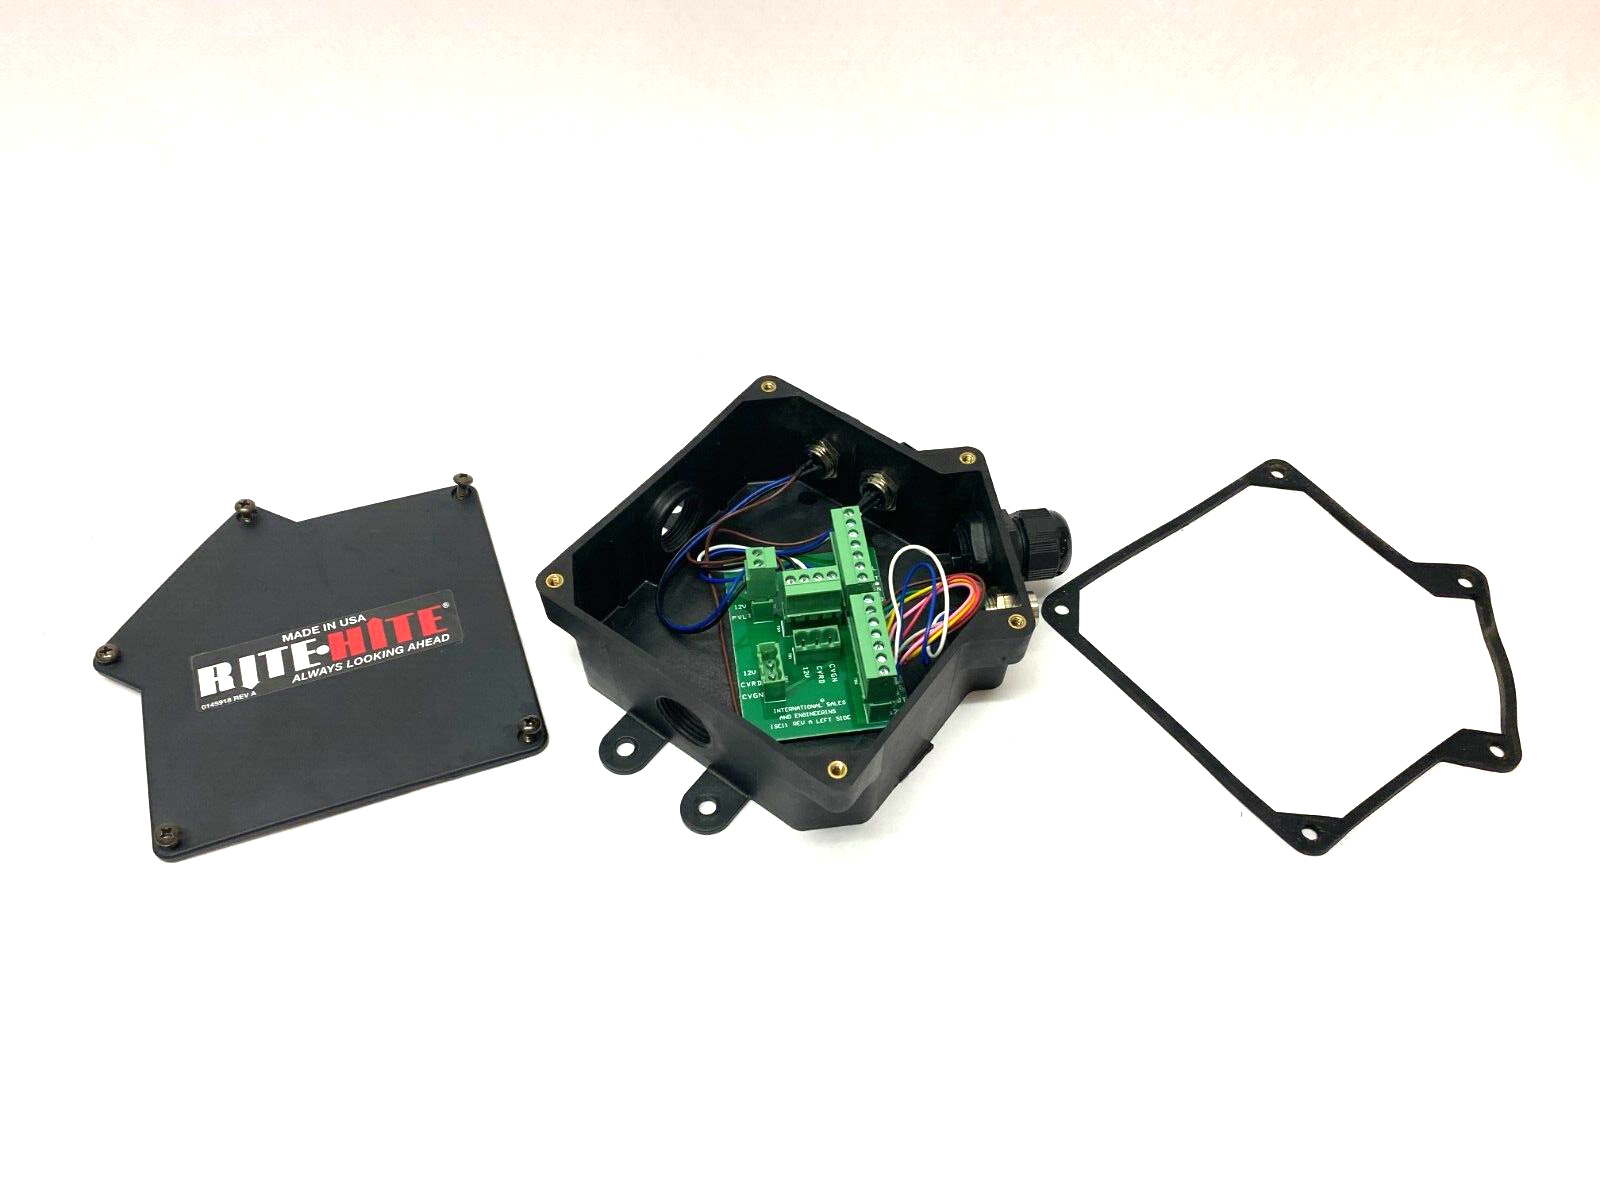 Rite Hite ISE11 Rev A Left Side Control Module Enclosure Wall Mounted 0145918